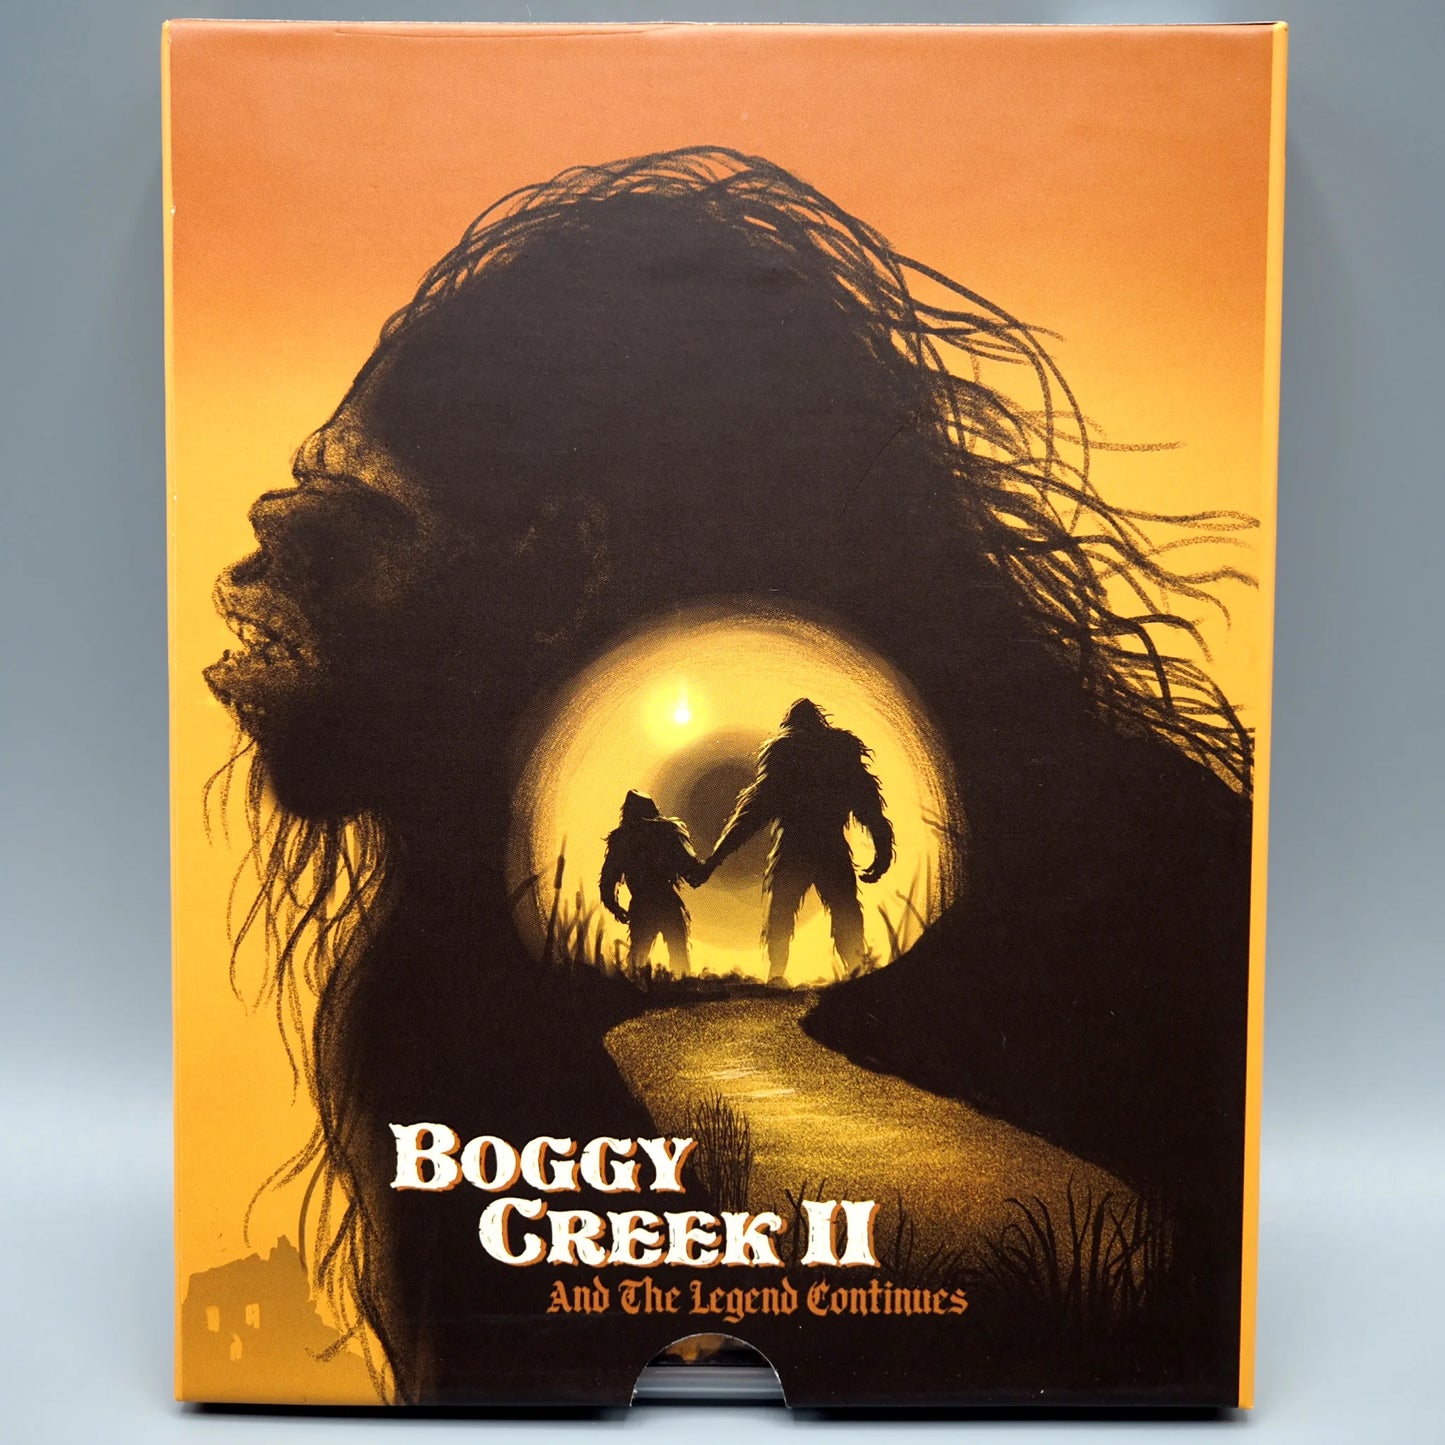 Boggy Creek II: And the Legend Continues Blu-ray with Limited Edition Slipcase